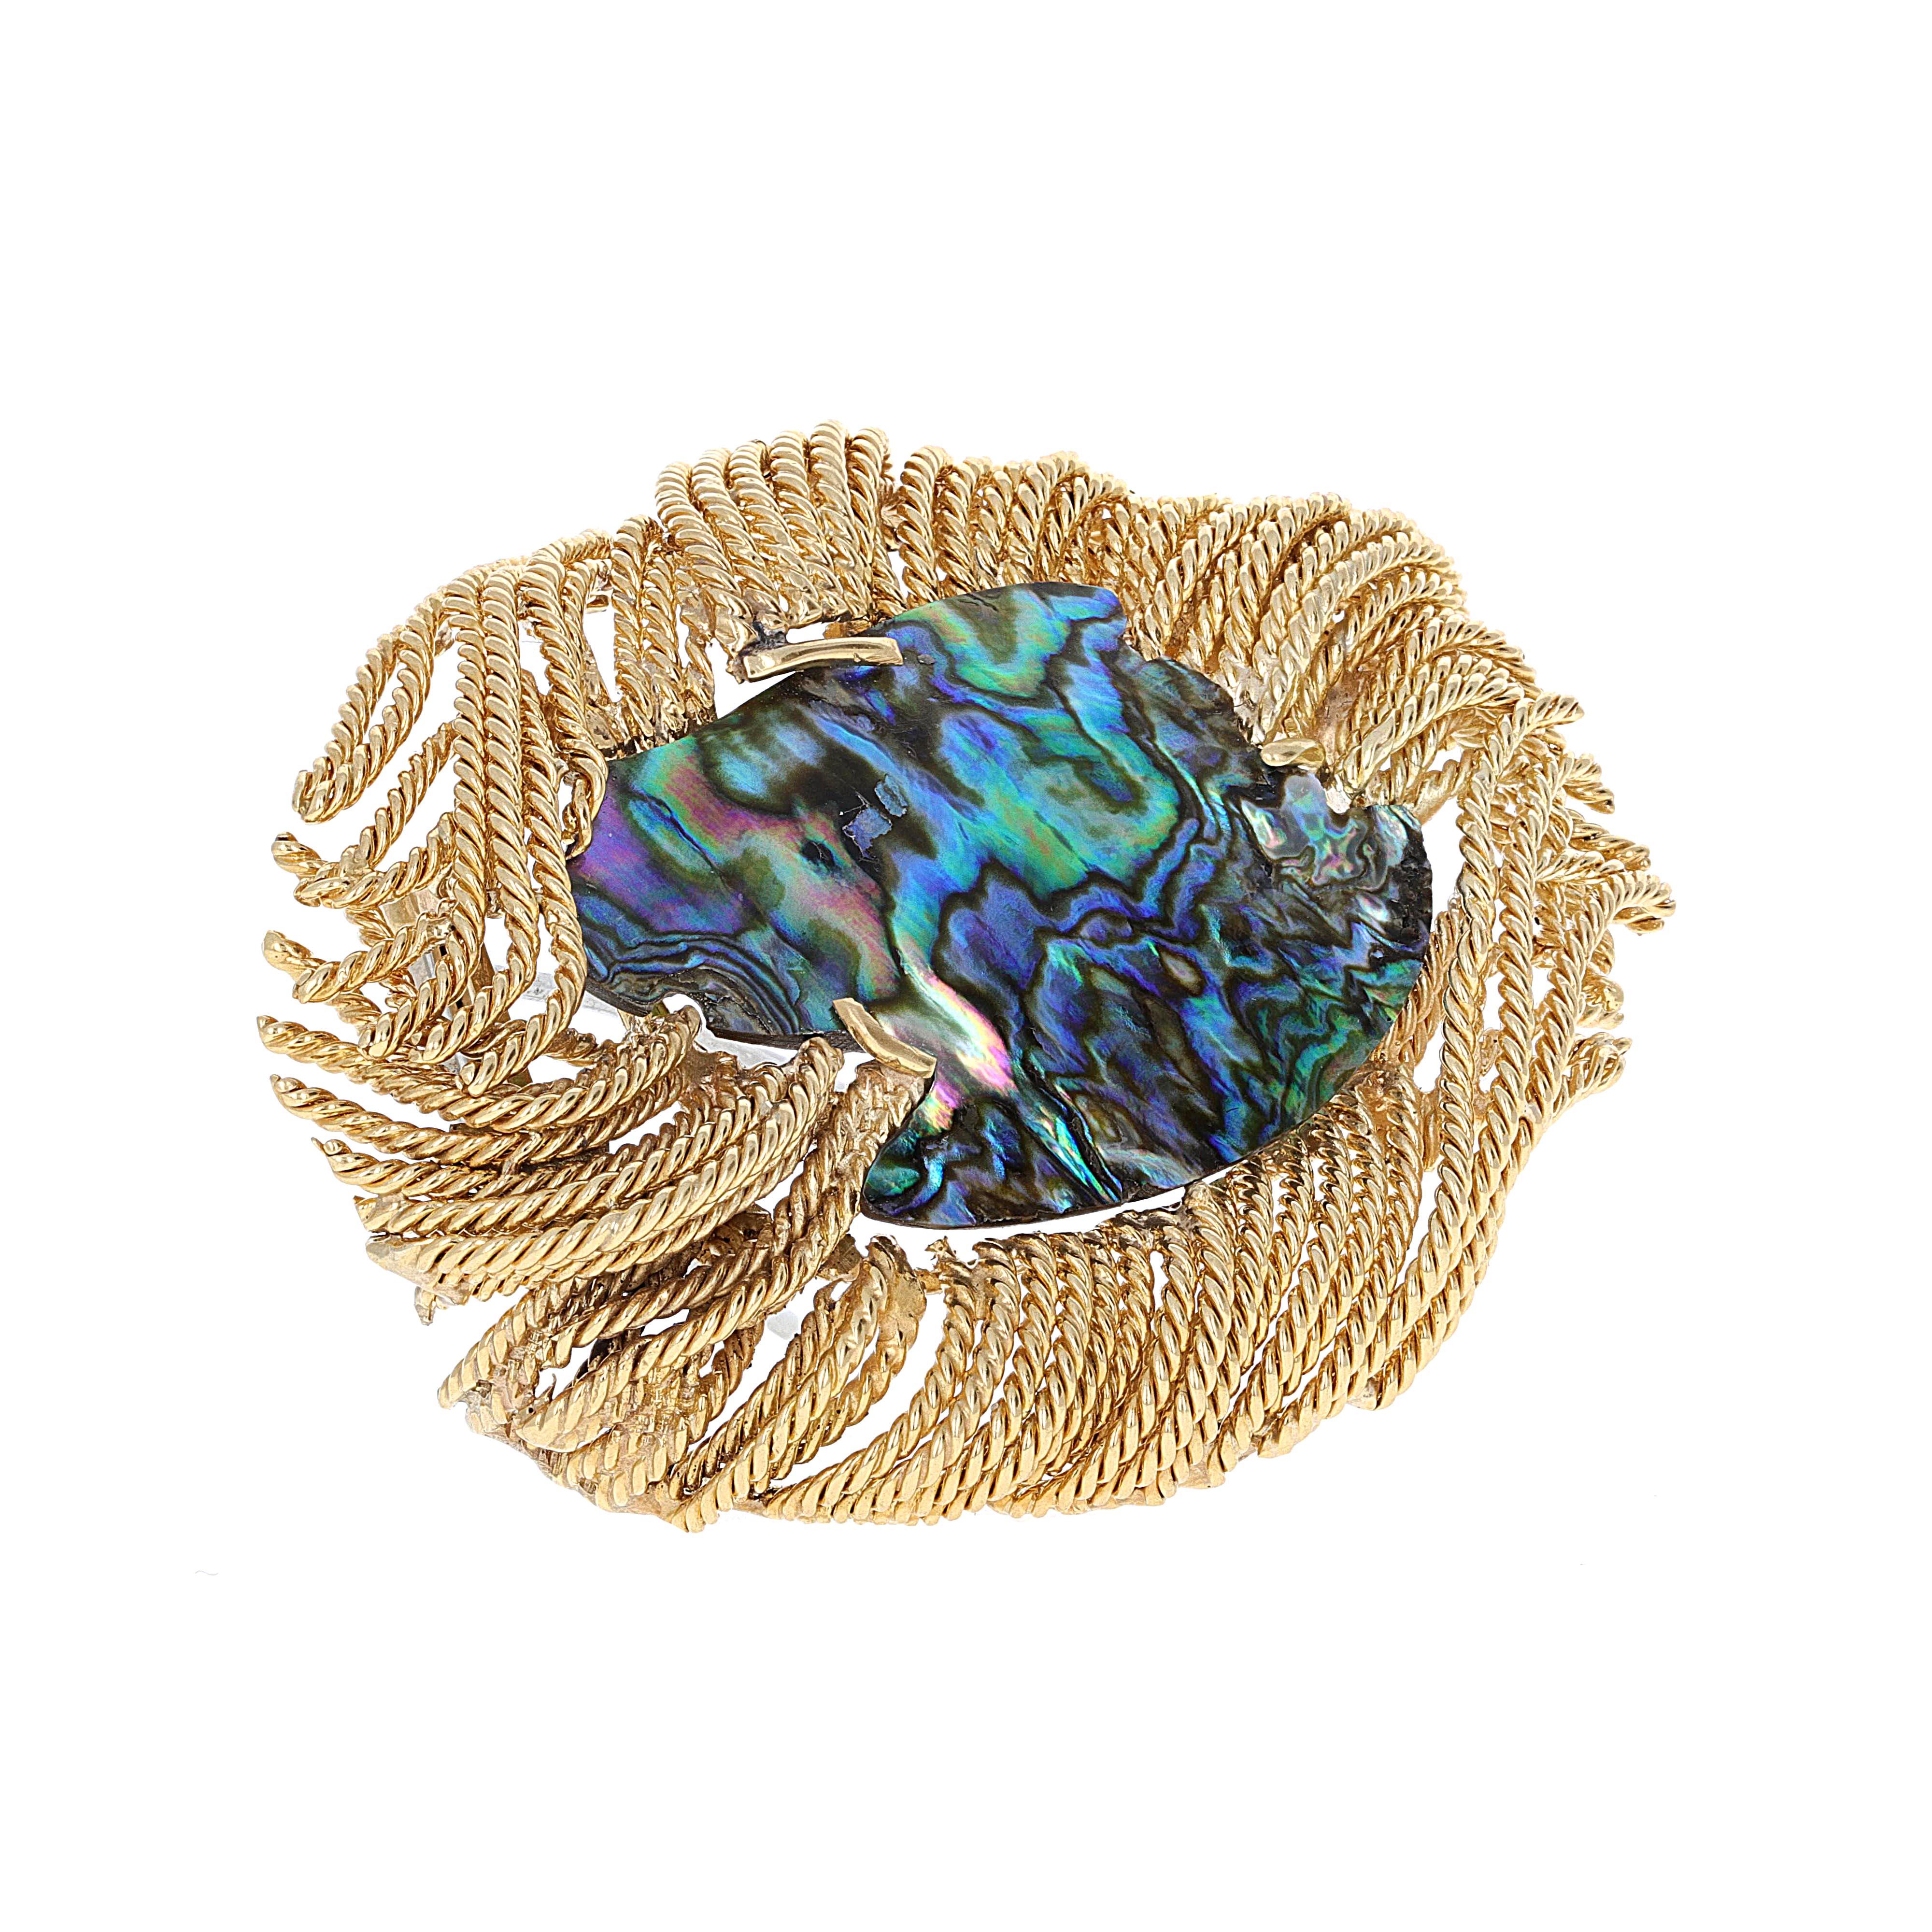 Unique 18 karat yellow gold “David Webb” Abalone Shell brooch. There are no two Abalone Shells alike. The iridescence in the stone is what gives each stone a different identity. The iridescence in the shell creates color and beauty. The shell was